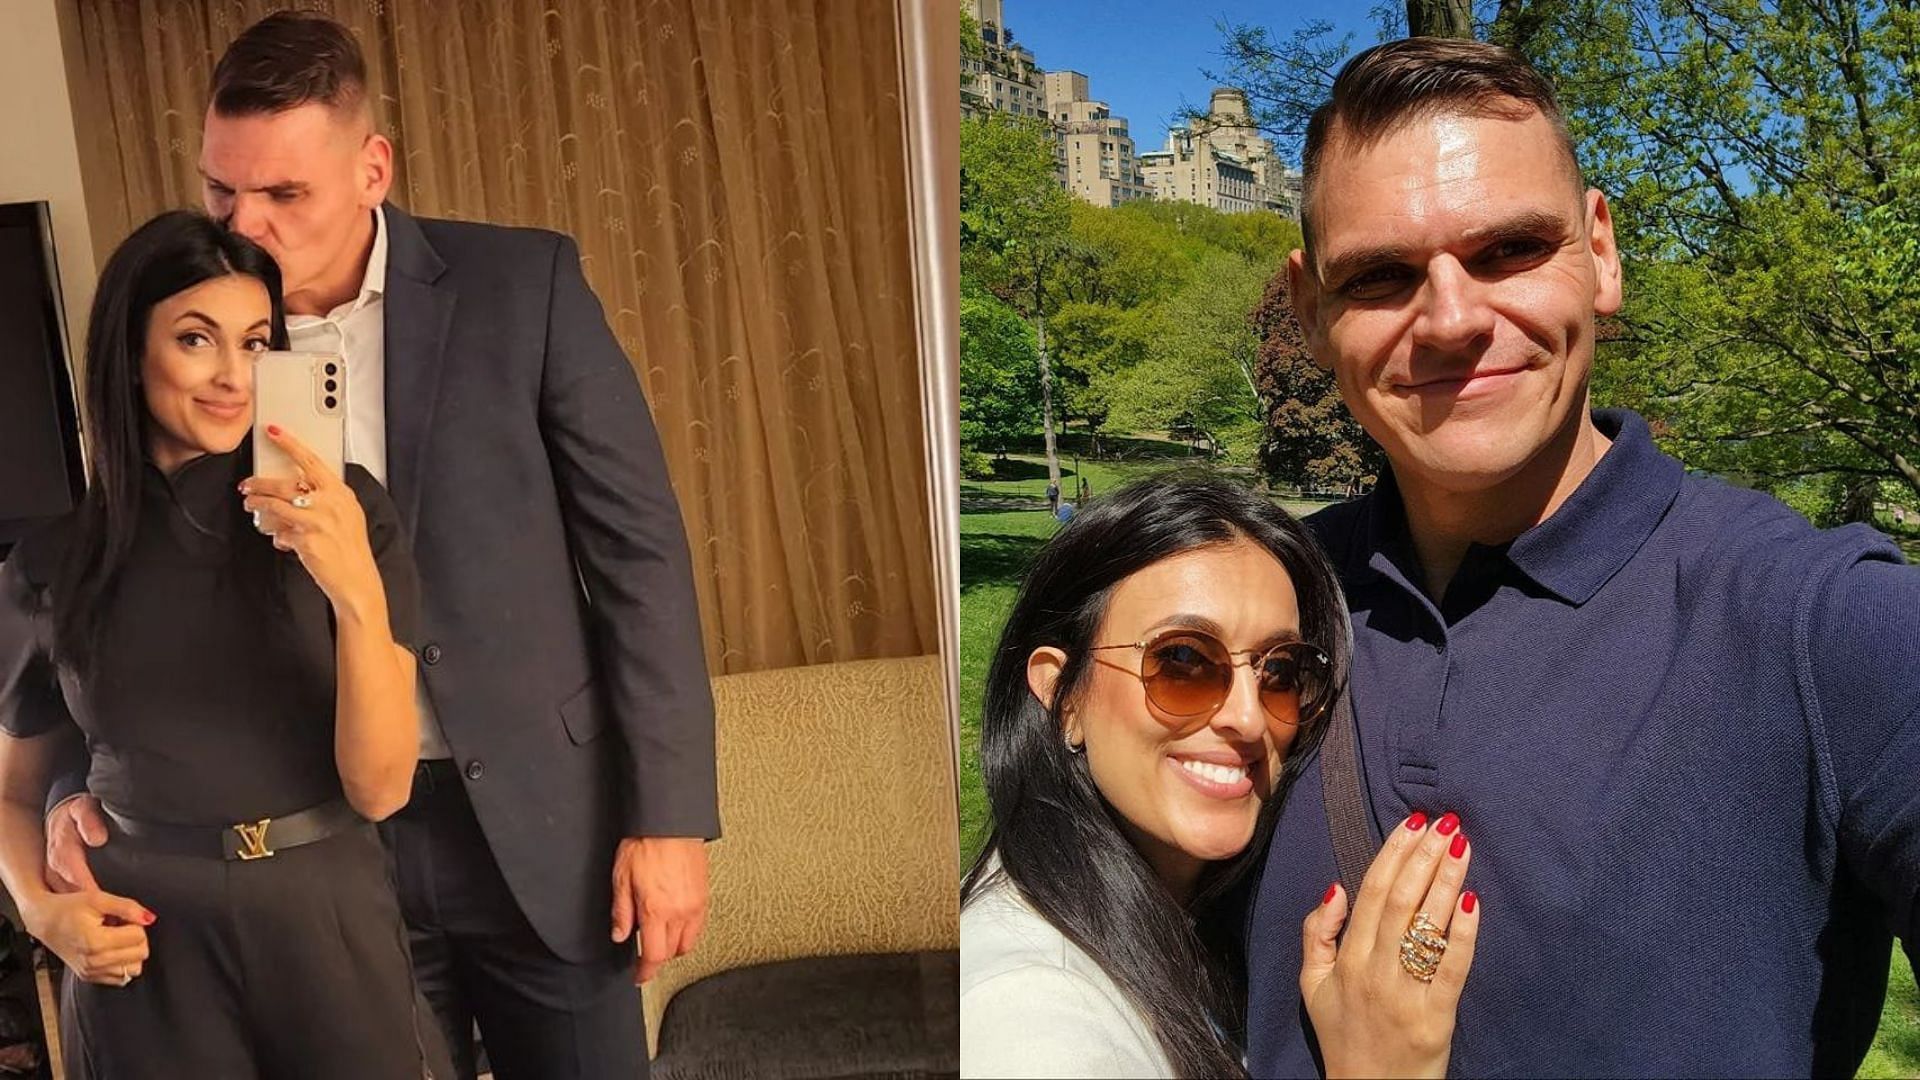 Former NXT UK Superstars and real-life couple Gunther and Jinny